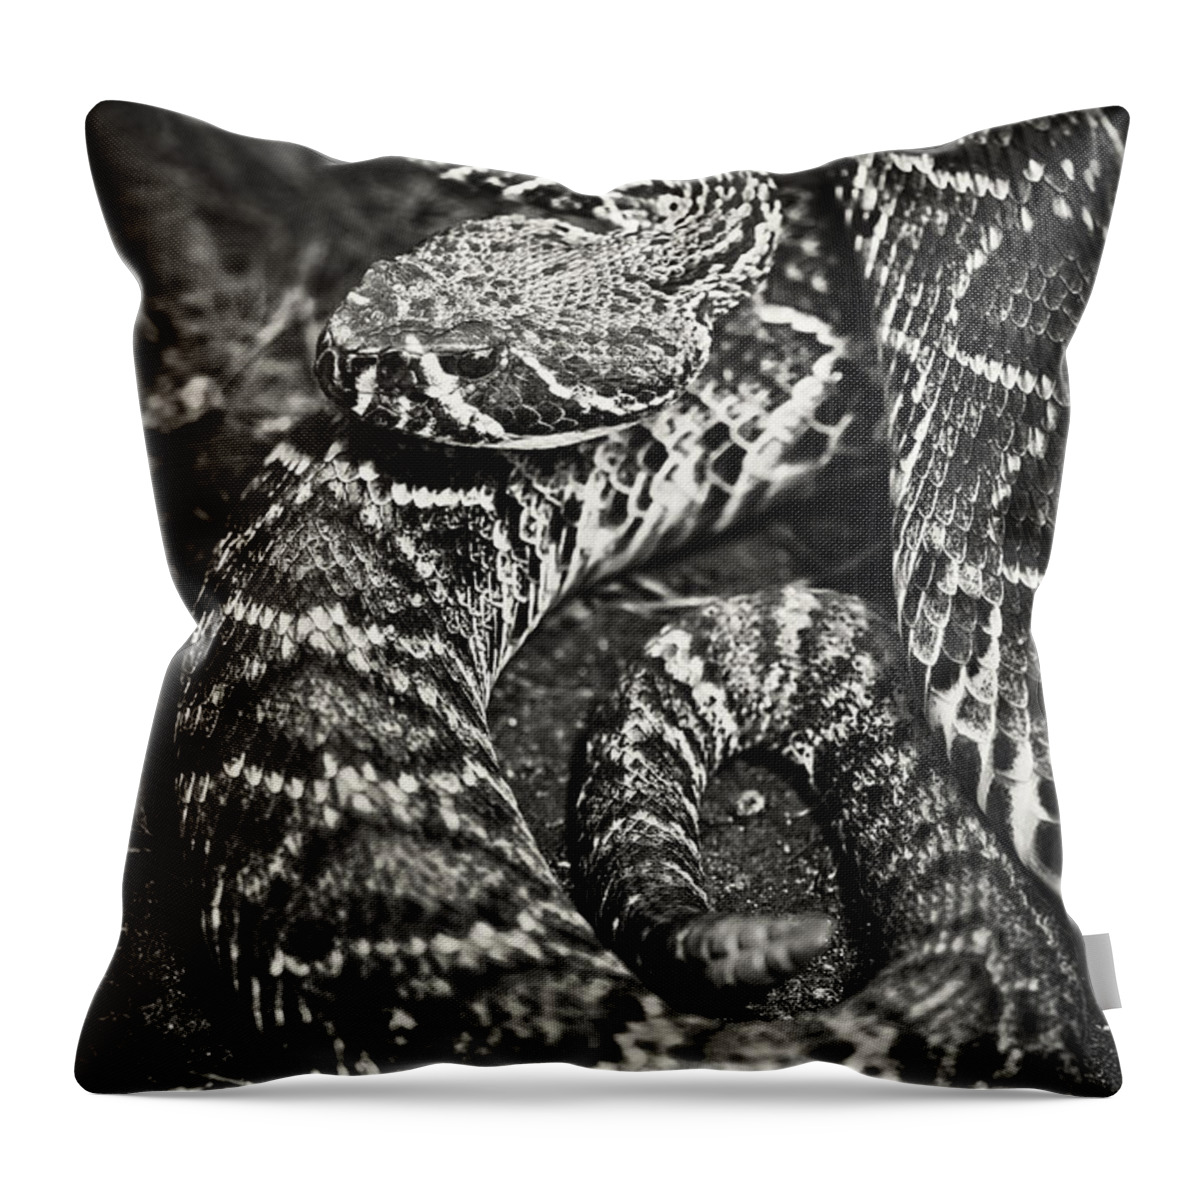 Eastern Throw Pillow featuring the photograph Eastern Diamondback Rattlesnake by Patrick Lynch